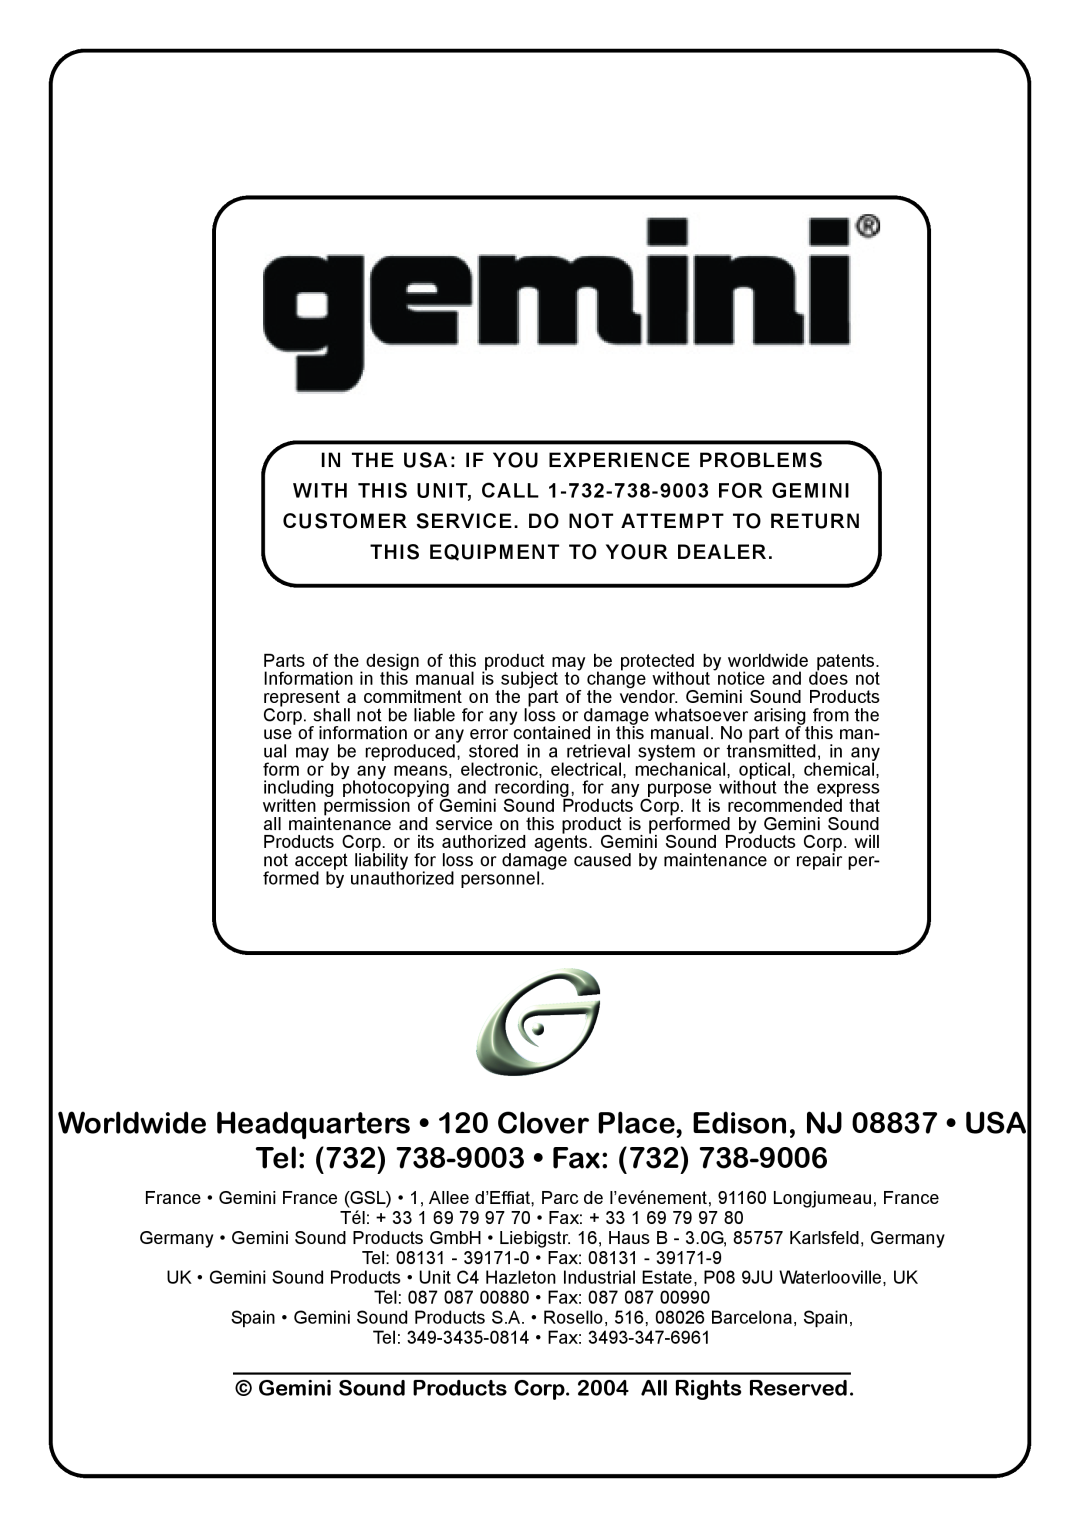 Gemini CFX-30 Tel 732 738-9003 Fax, In The Usa If You Experience Problems, WITH THIS UNIT, CALL 1-732-738-9003FOR GEMINI 